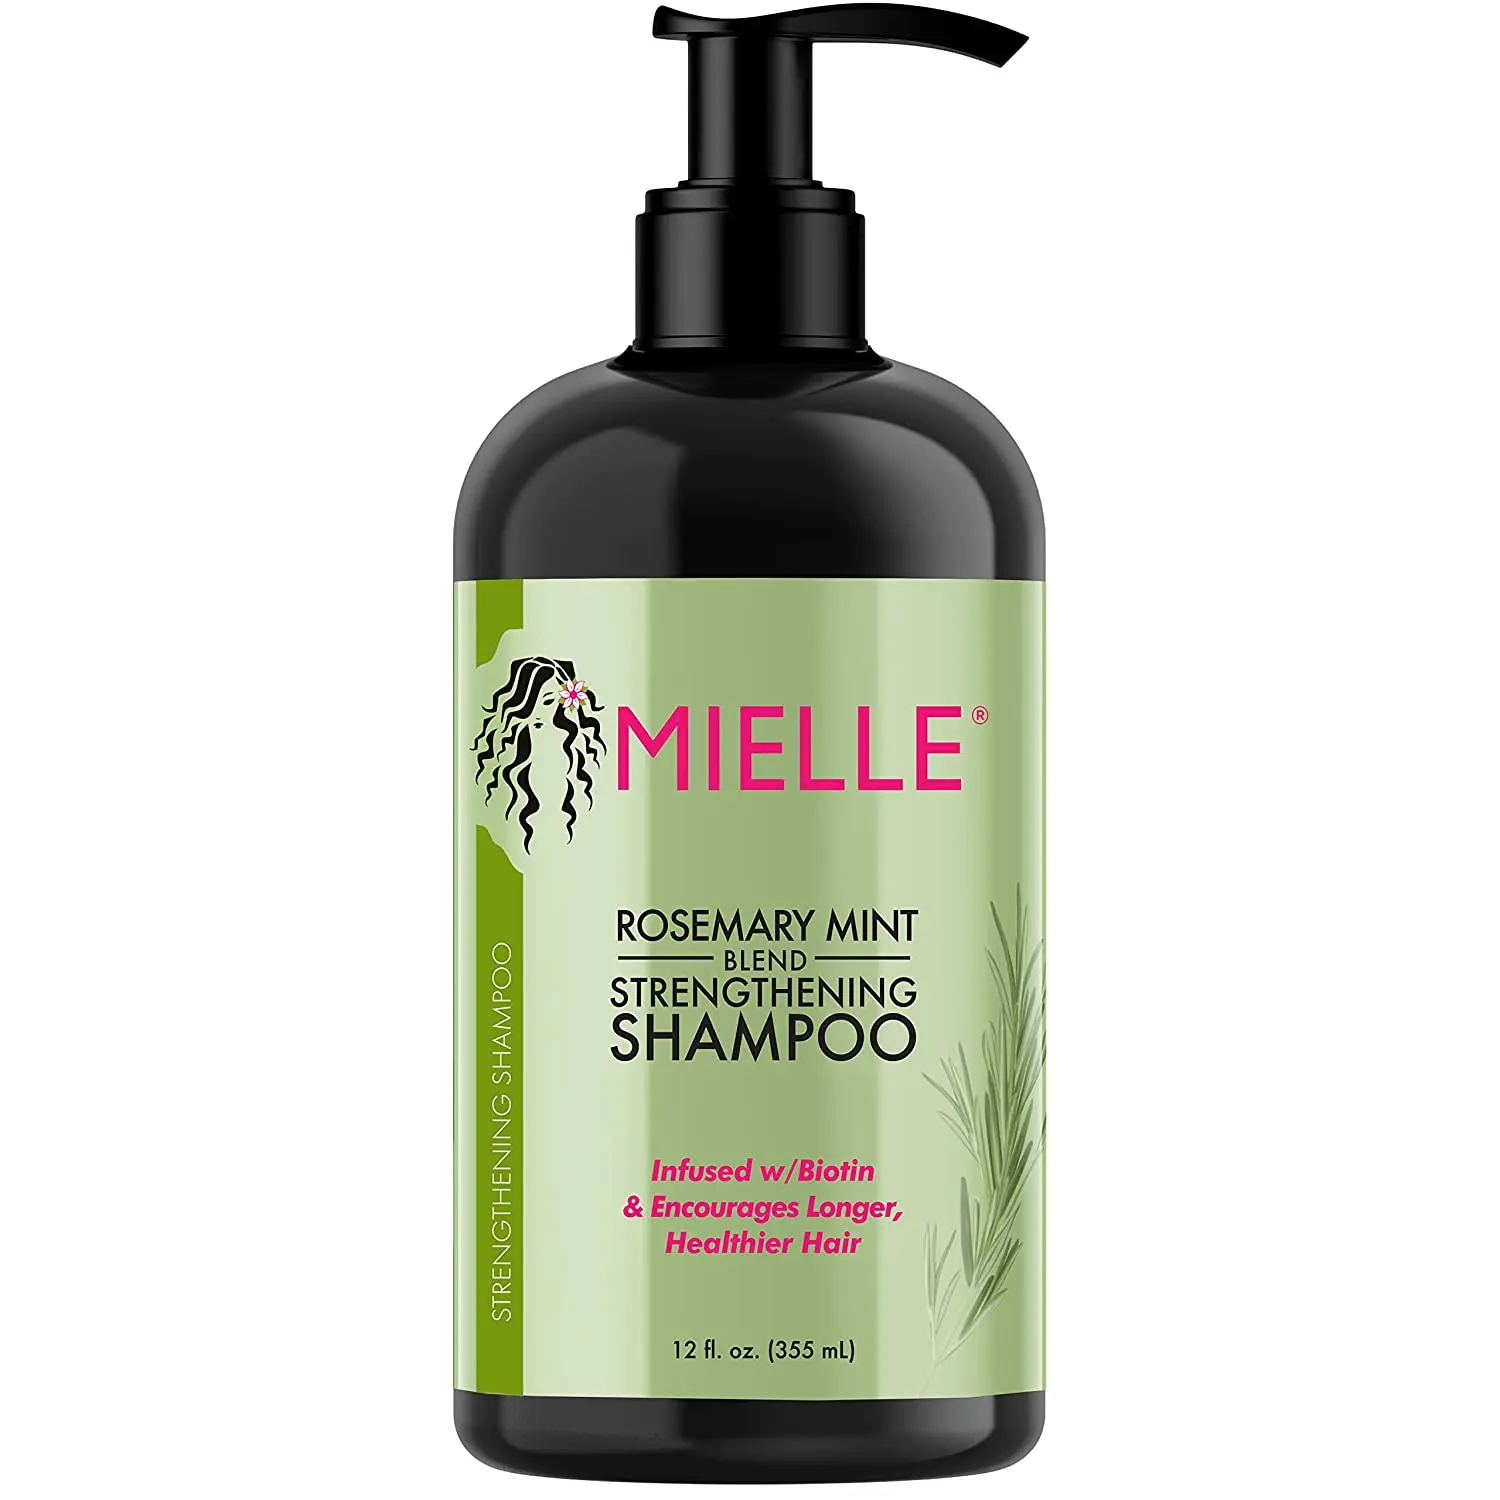 You are currently viewing Mielle Shampoo Reviews: Is It Worth Trying?